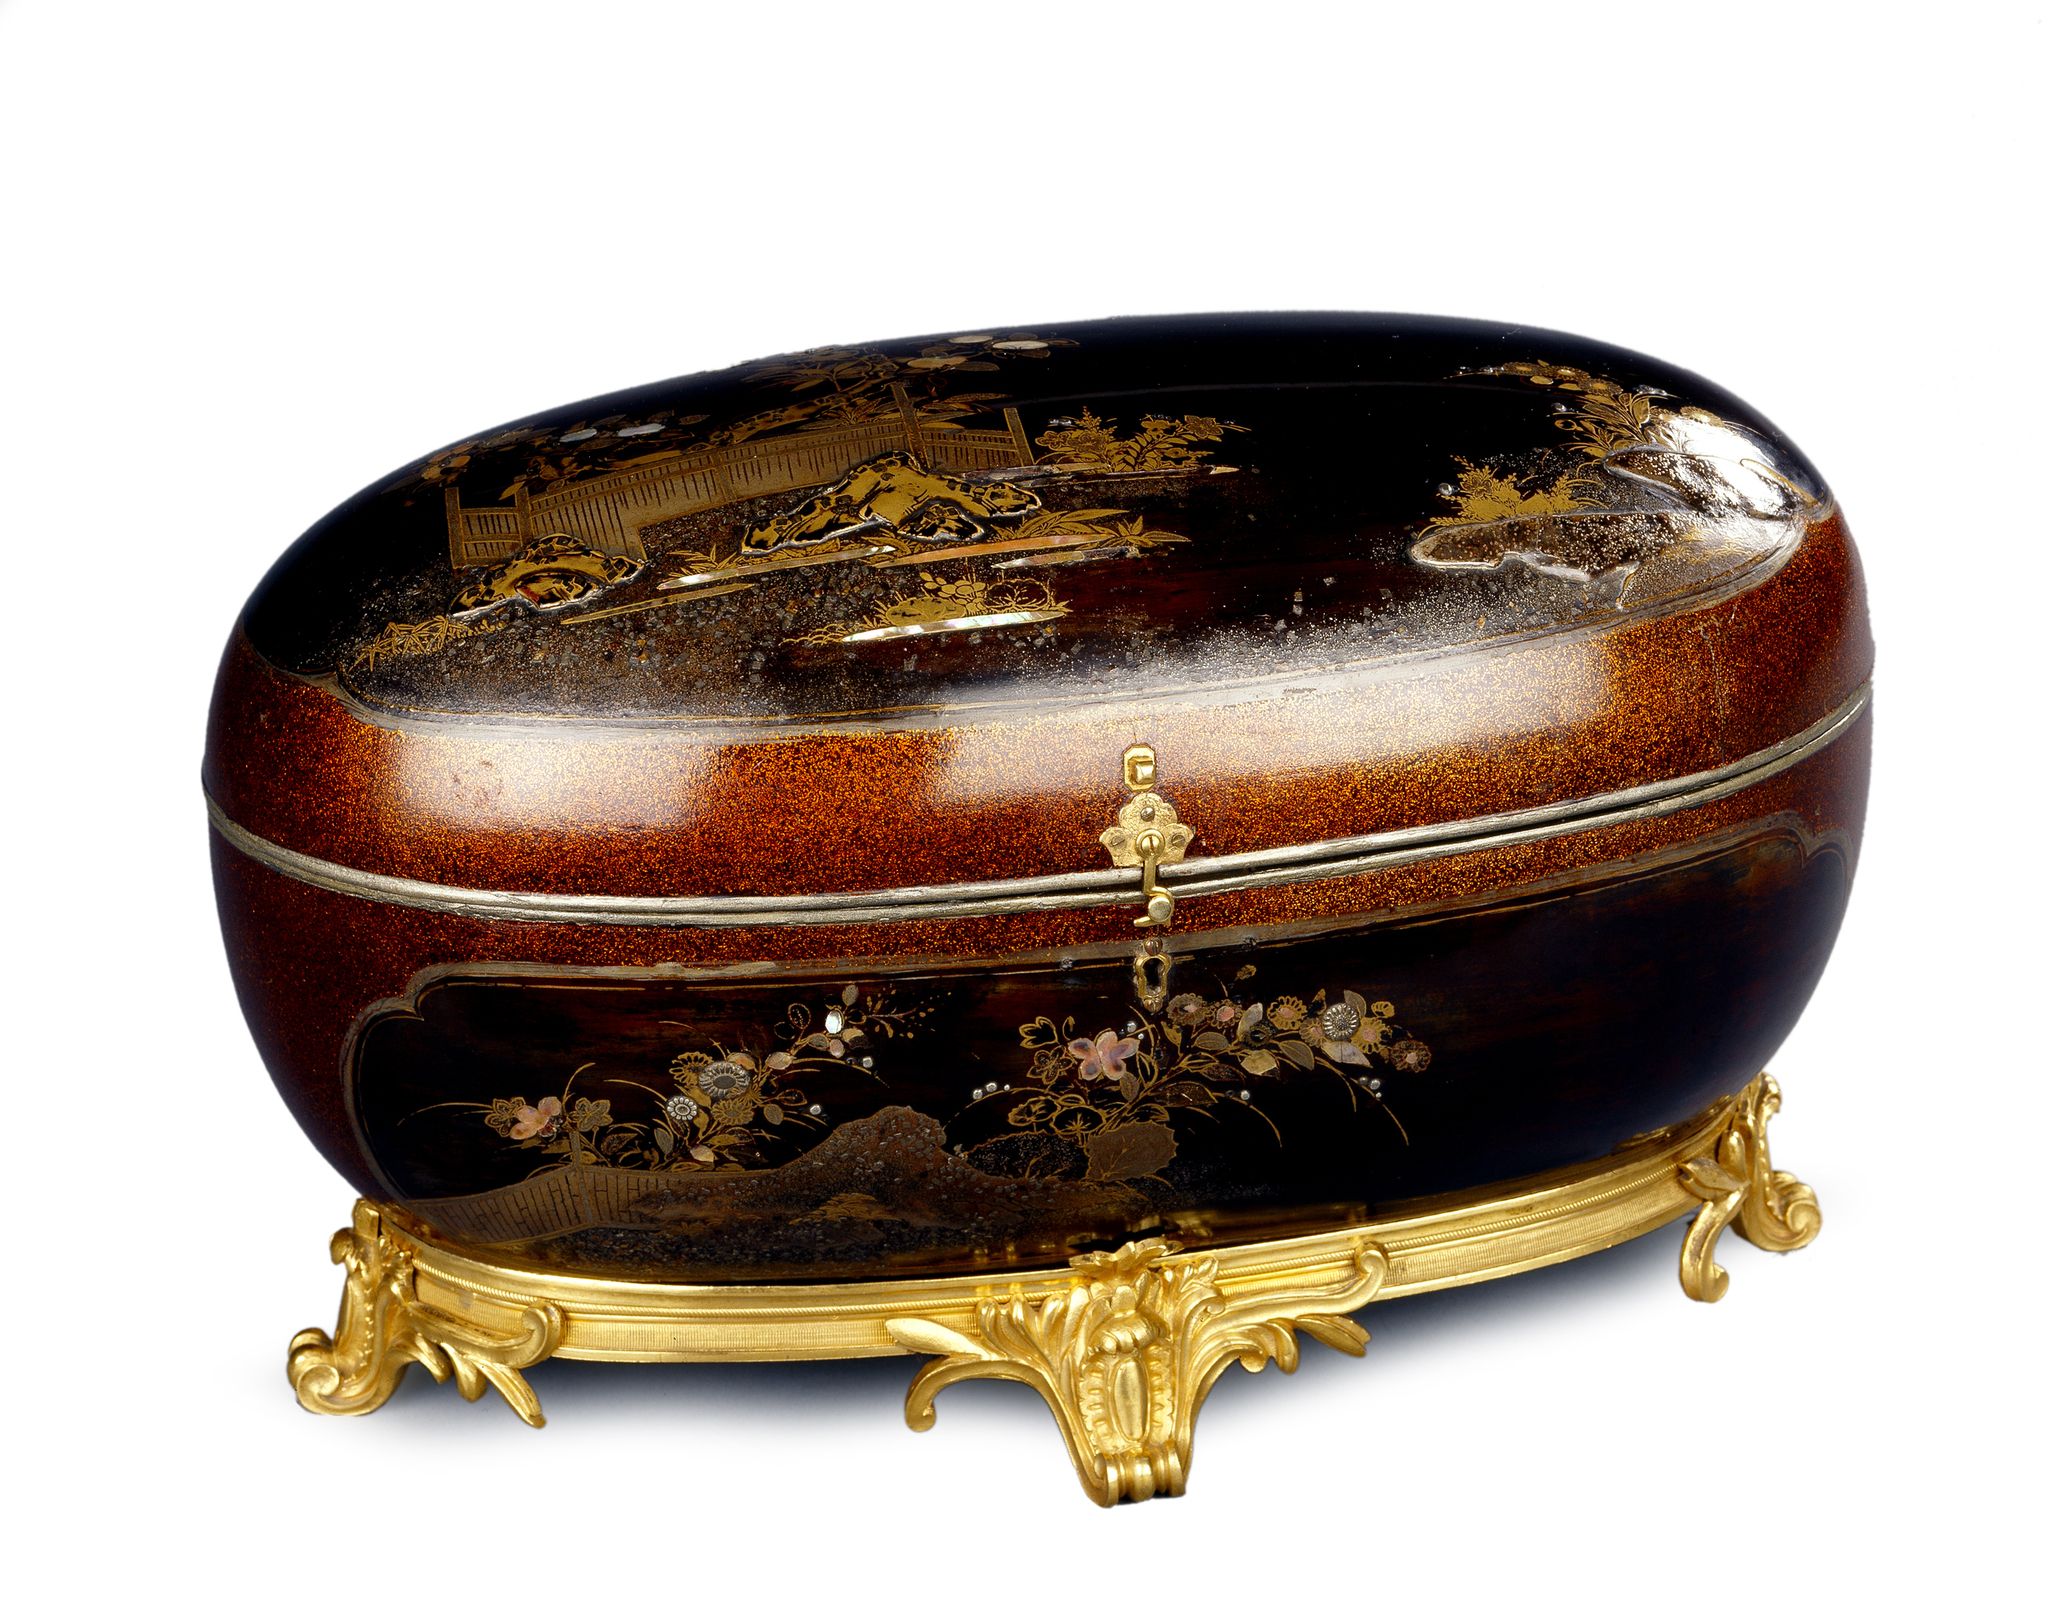 A Japanese Oval Lacquer Casket Japan circa 1690,  with domed top, decorated on all sides with panels